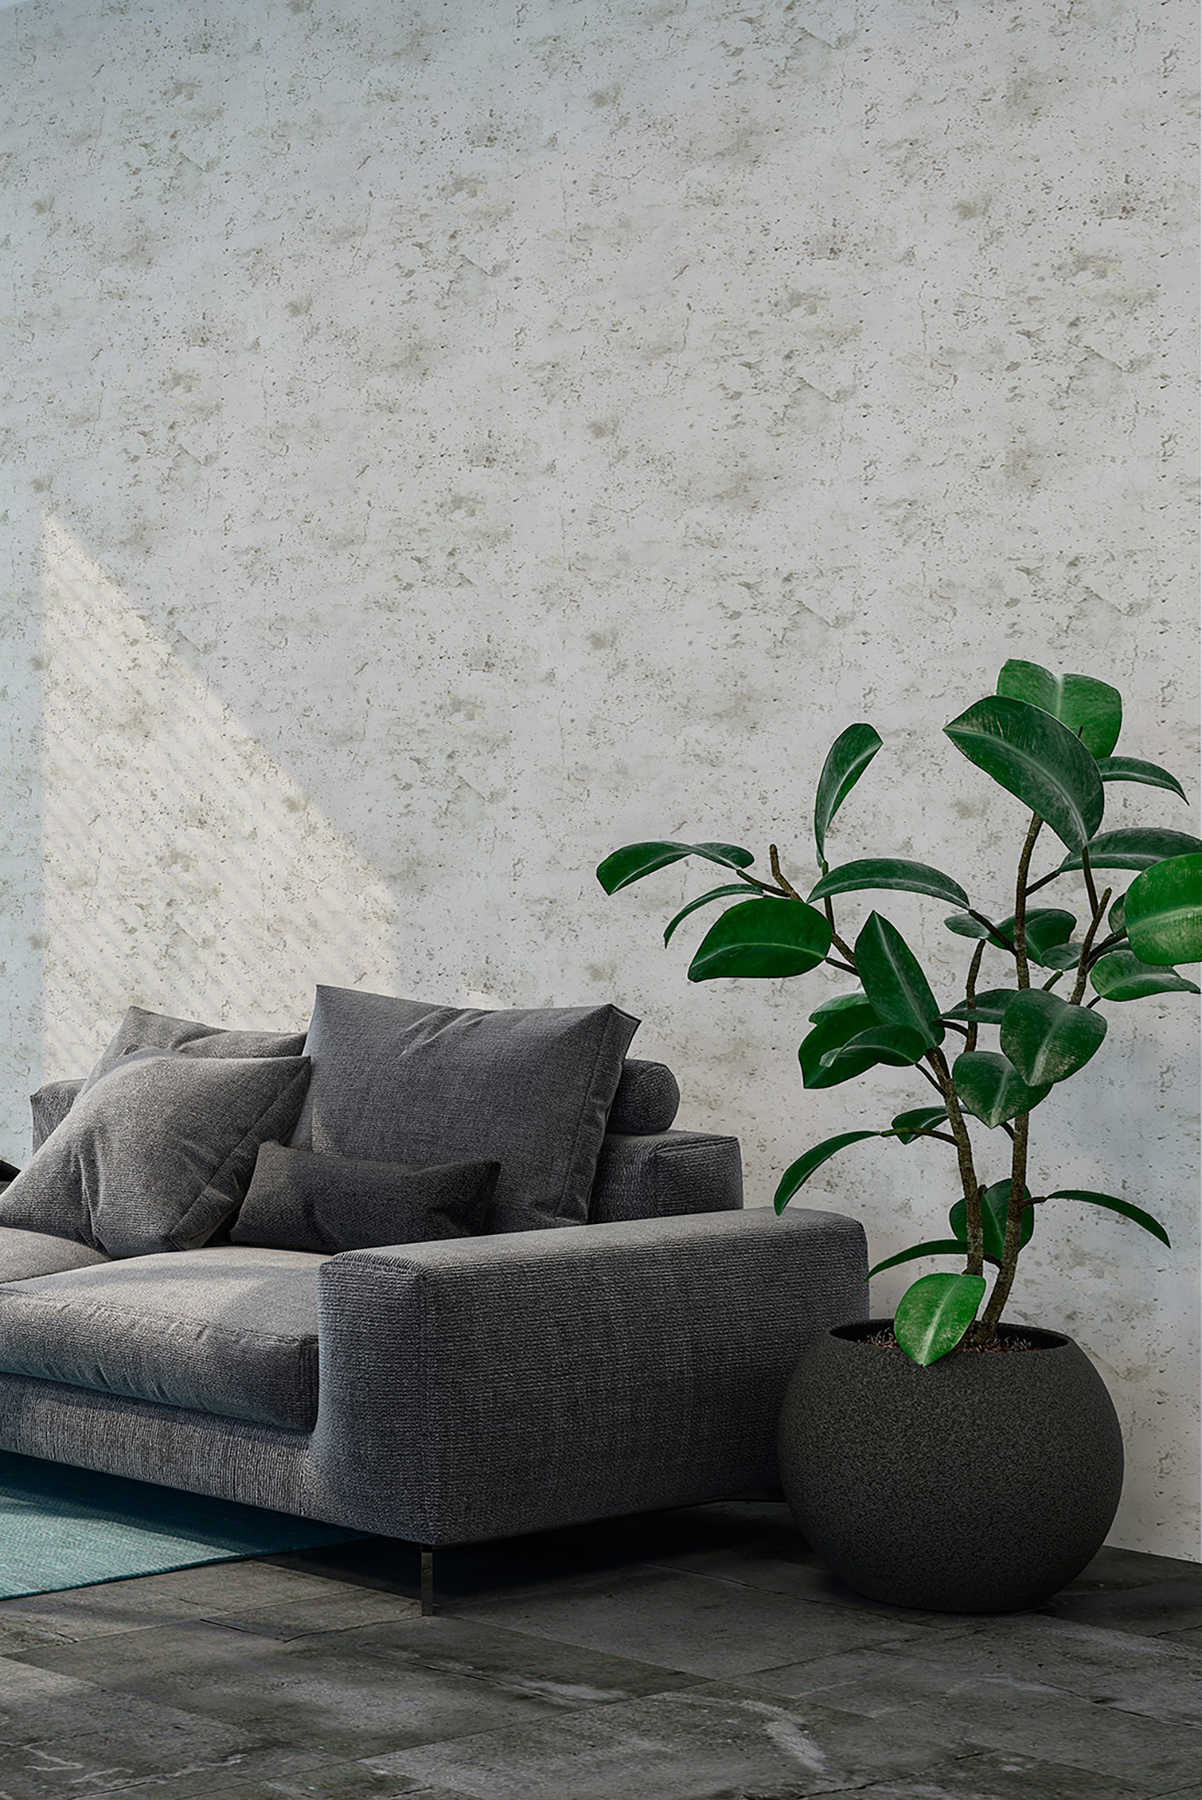             Concrete wallpaper in industrial style - grey
        